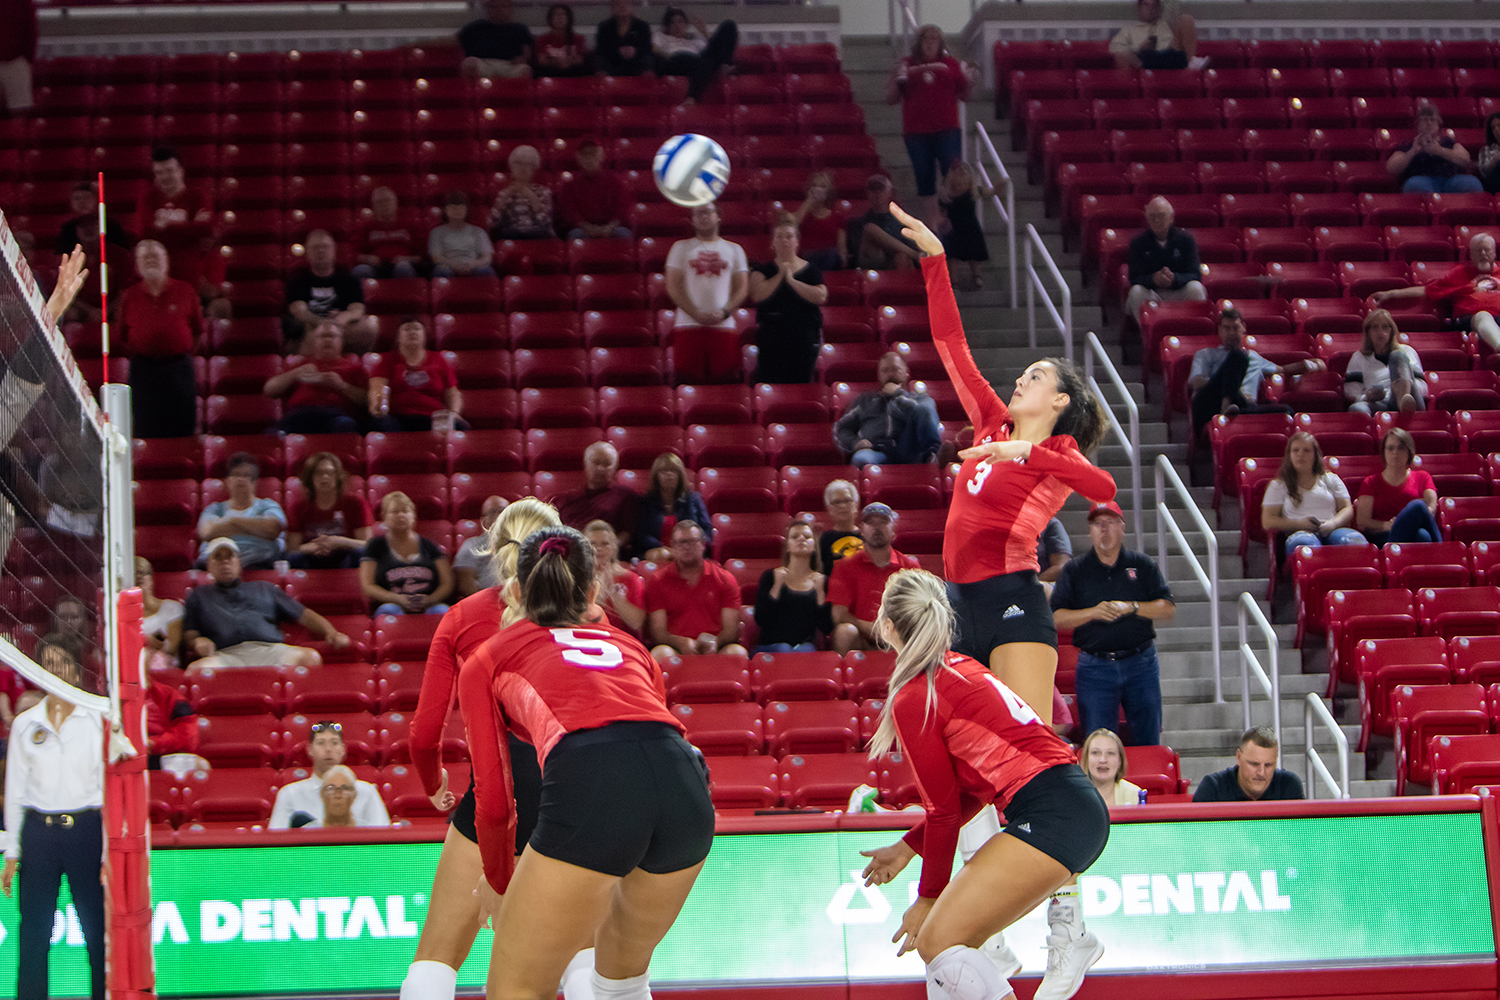 Coyotes defeat Iowa as part of weekend sweep